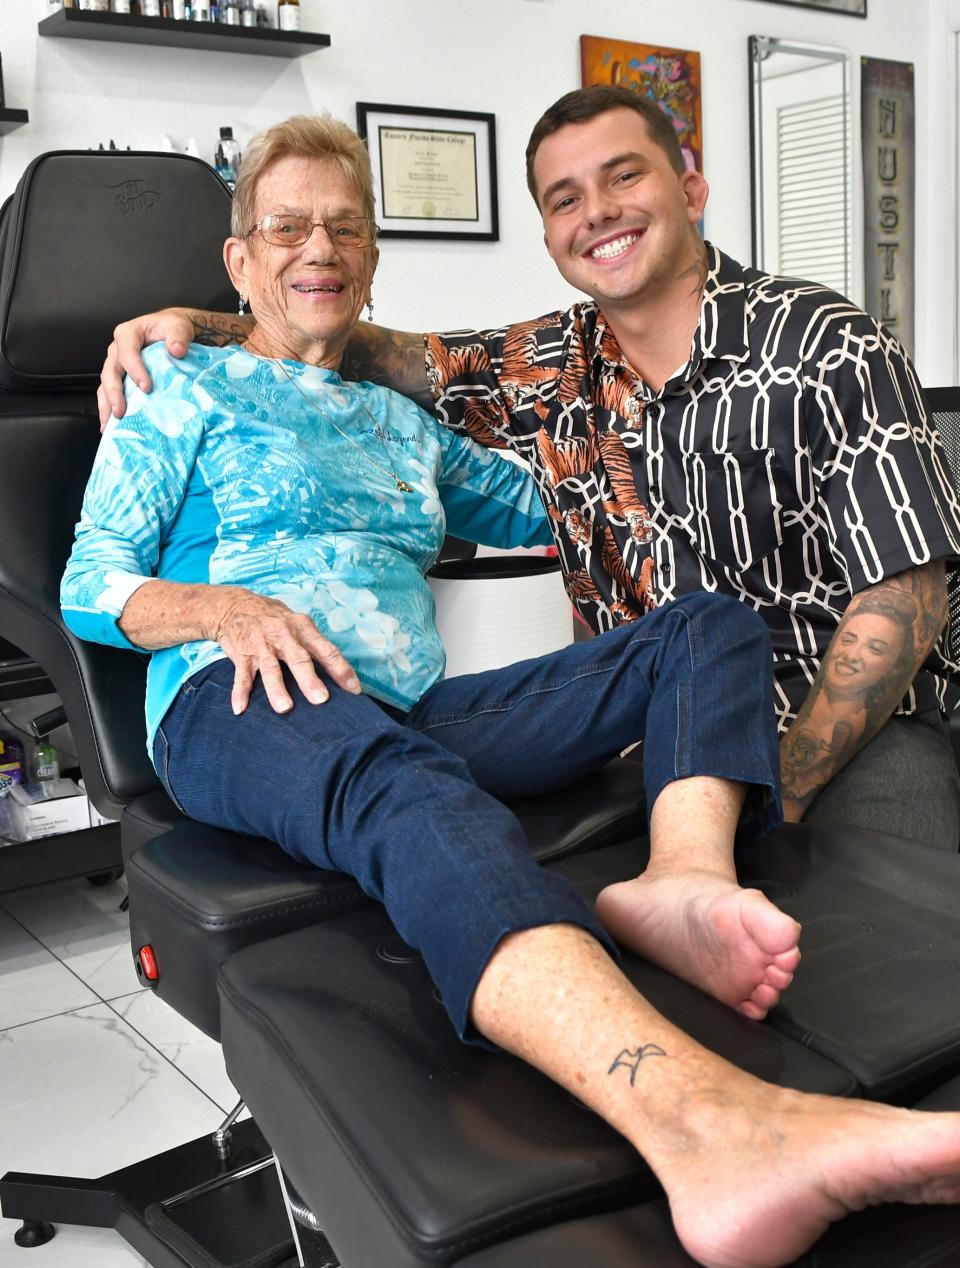 Last April, Judi Batchelor got a small bird tattoo on her legabove the ankle in honor of a loved one. She plans to get more for her 85th birthday in April. She used Cash Combs Studio in the Sea Park Plaza in Satellite Beach. Cash Combs, seen here with her, who usually does much more elaborate tattoos, will add the new ones.